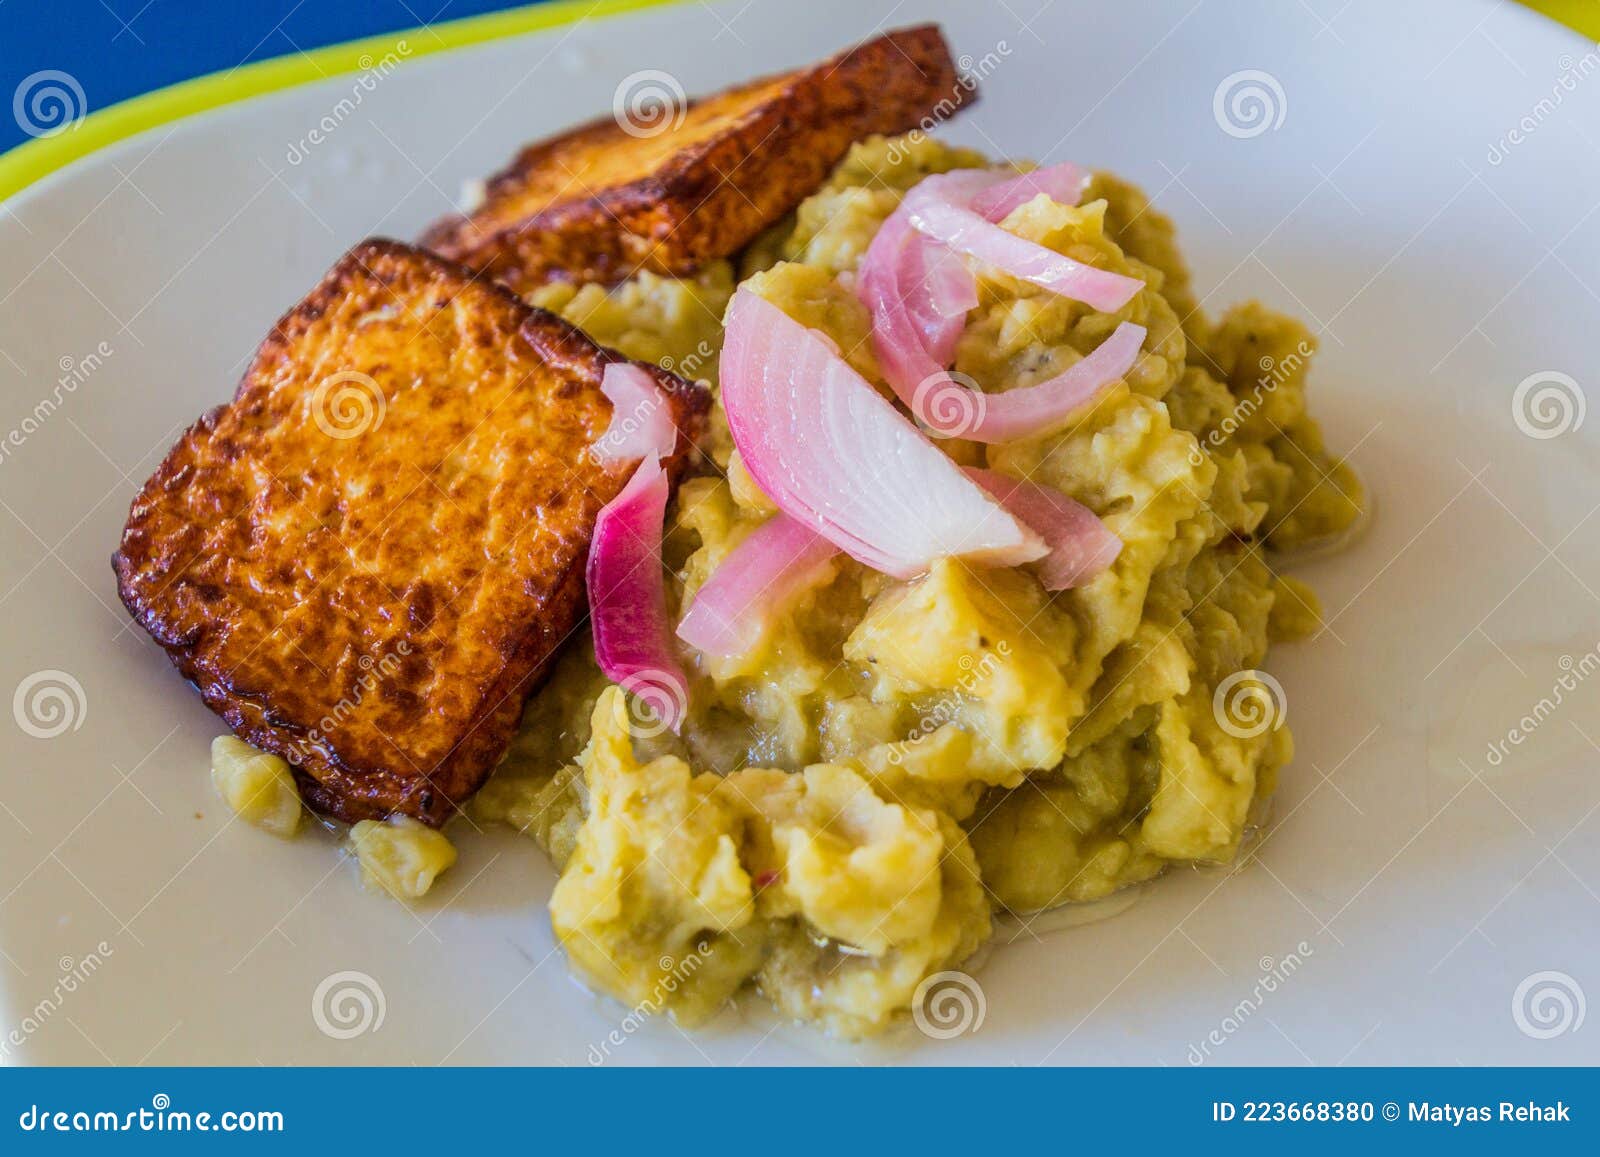 meal in dominican republic - fried cheese with mangu mashed plantain